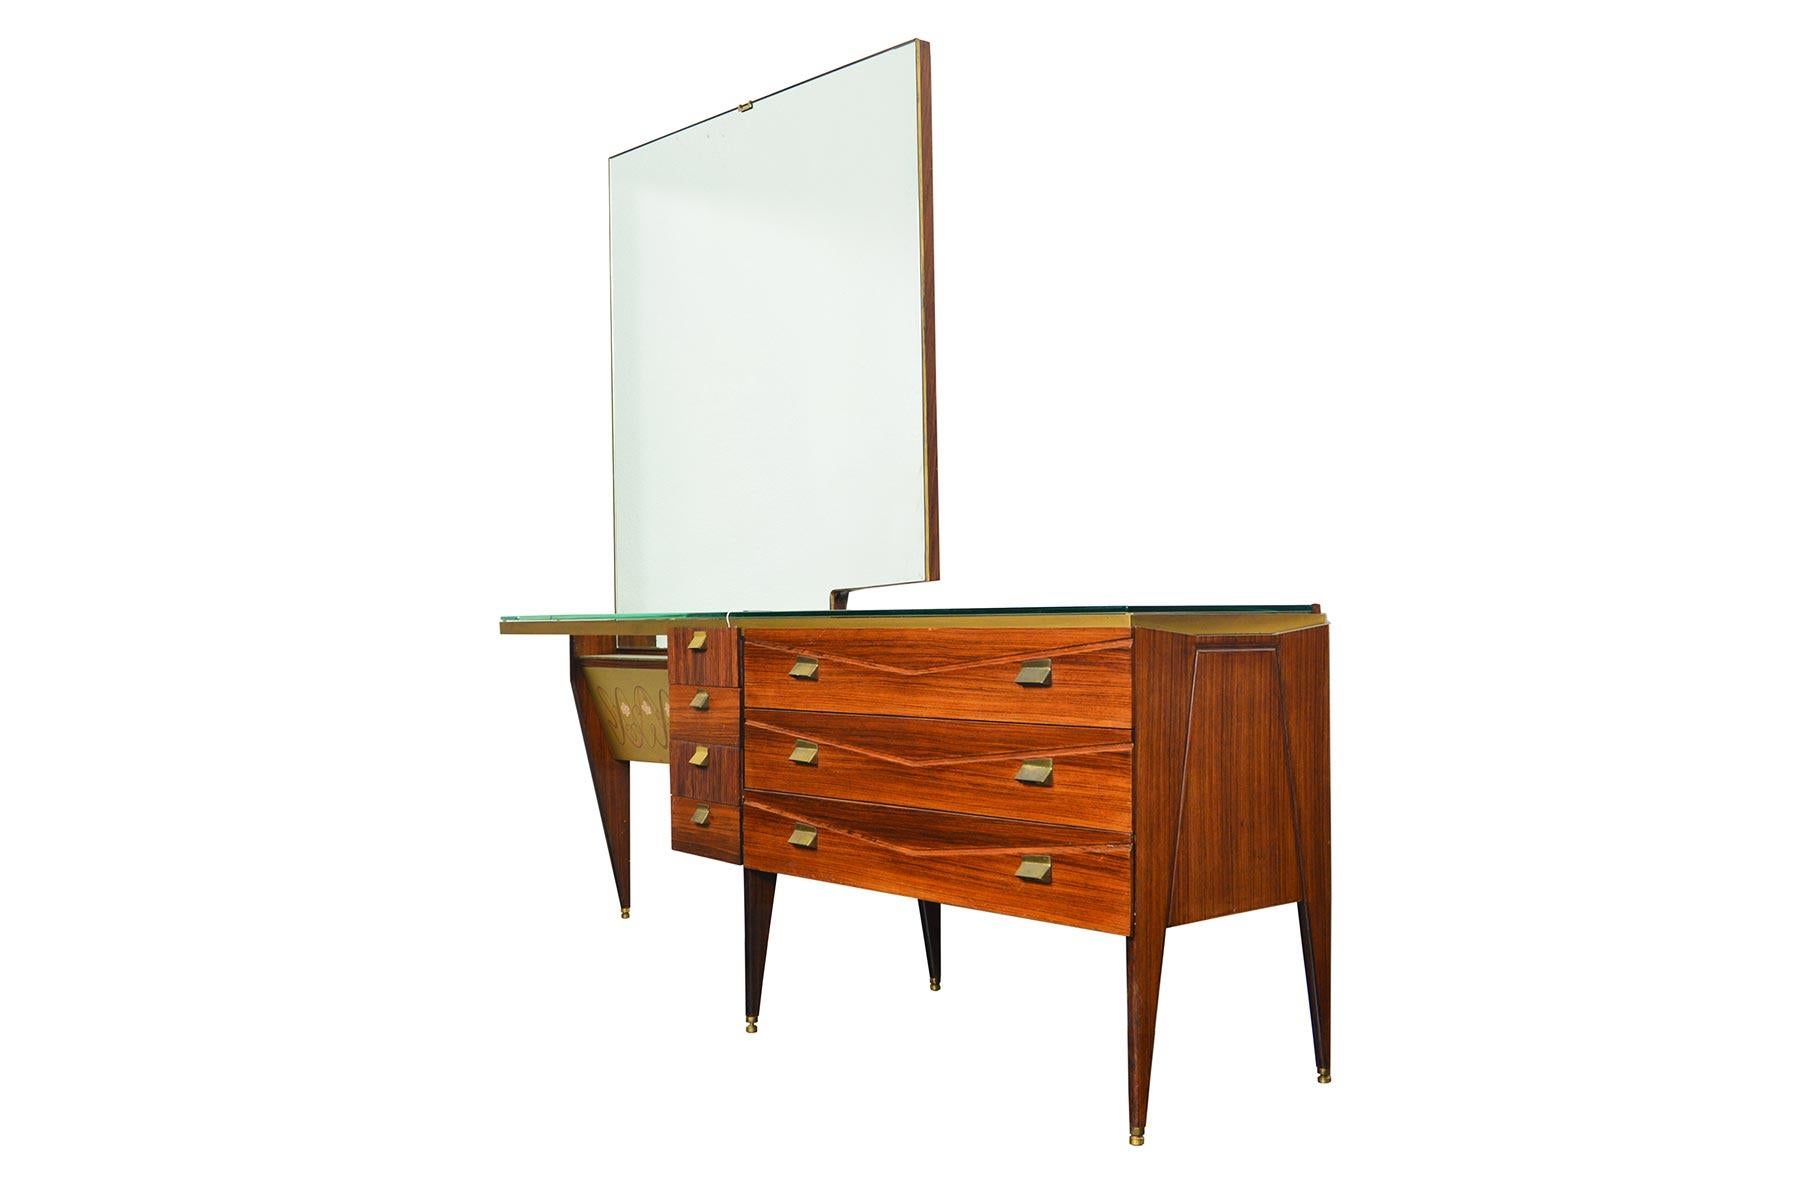 Stunning in design and execution, this Italian modern vanity was crafted by Vittorio Dassi in the 1950s. Cased in rosewood, this vanity is supported by five legs capped in brass. Three large drawers are adorned with brass pulls and feature a routed